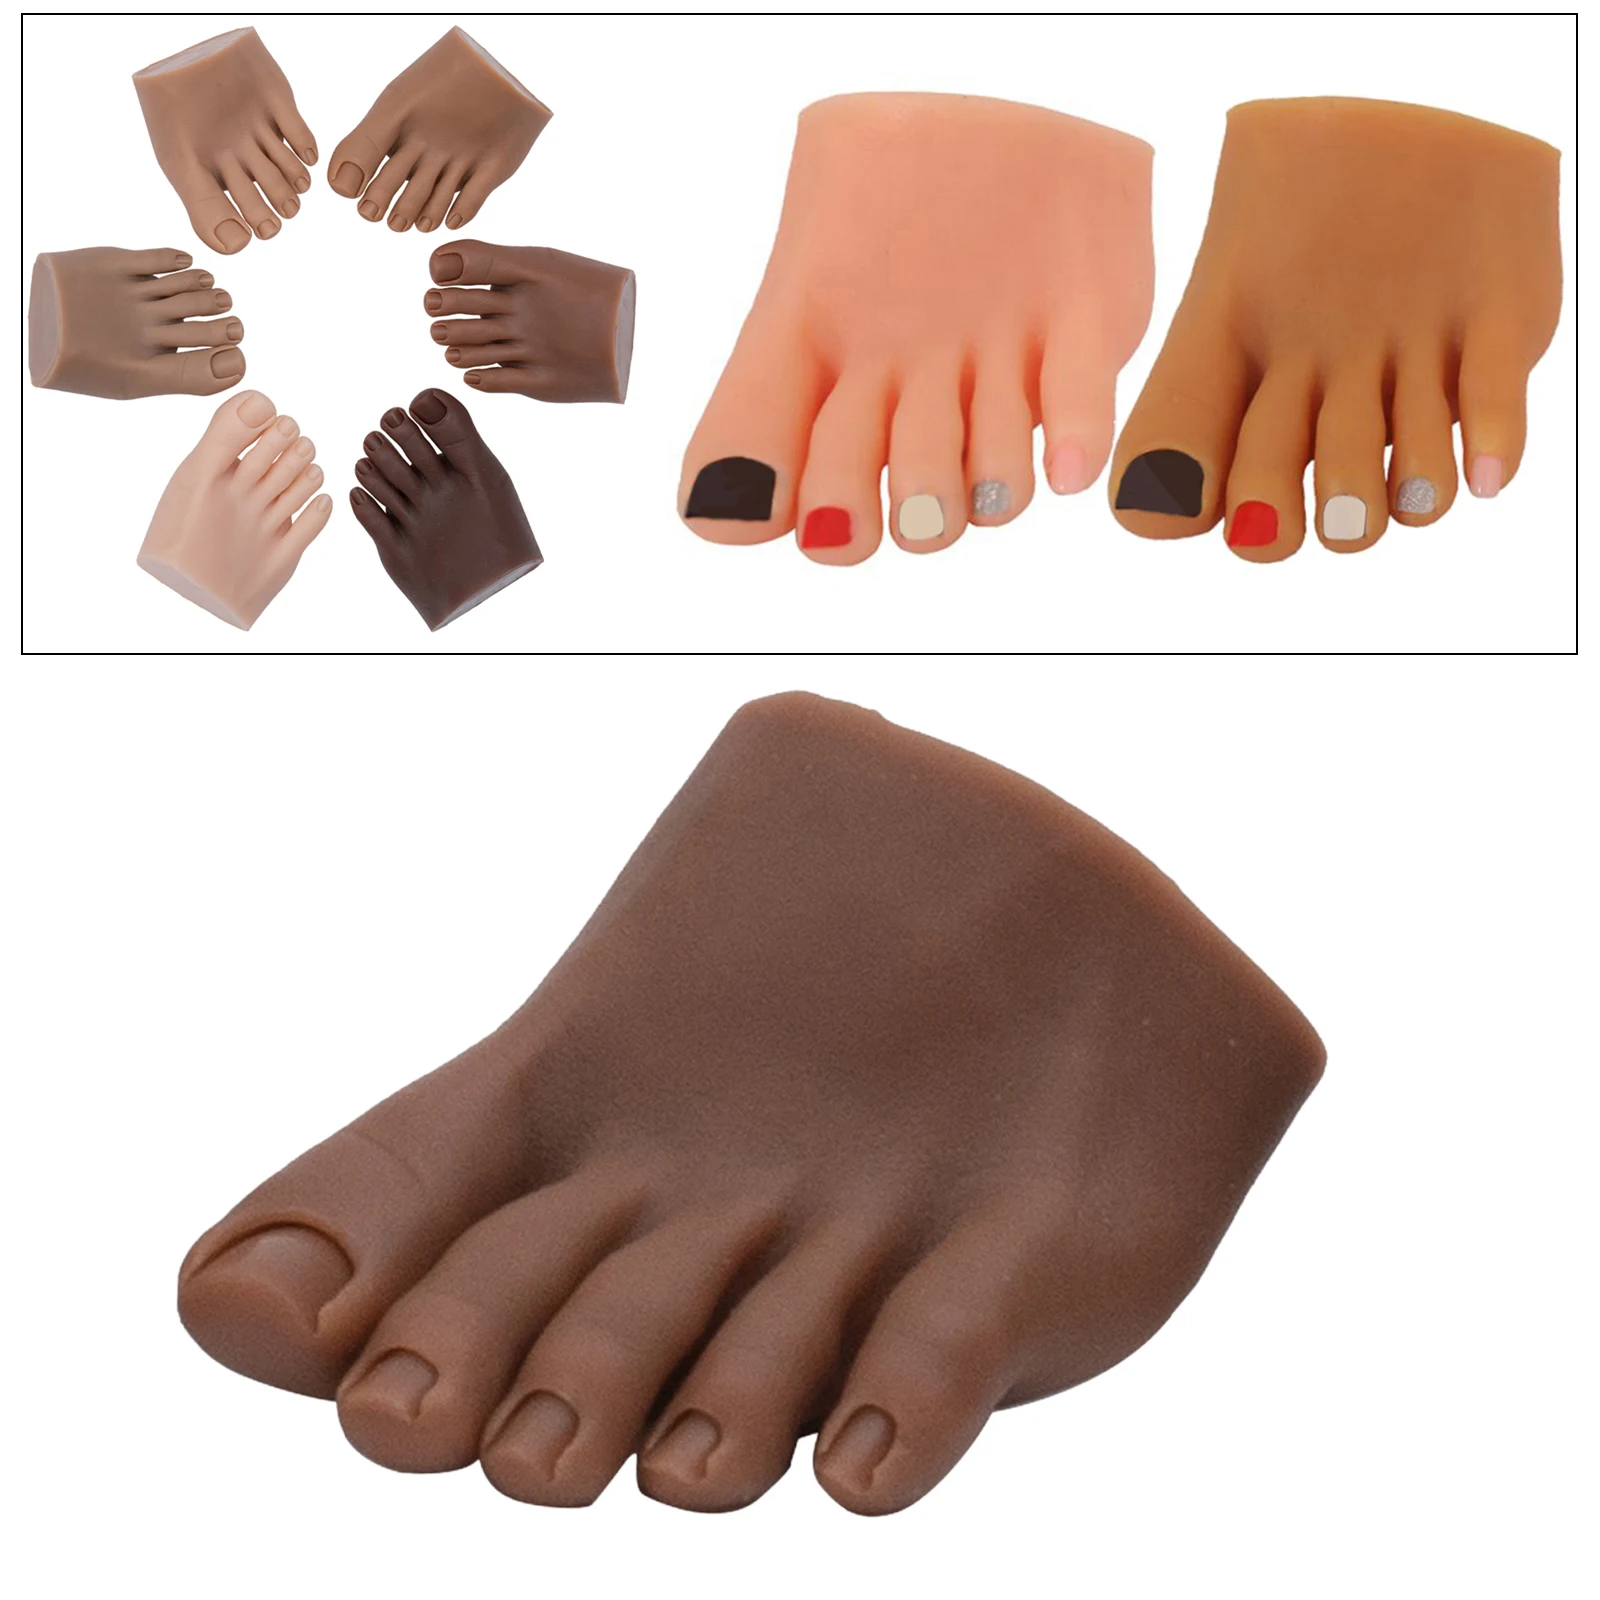 Nail Practice Foot Model Mannequin for Nail Art Beginners Display